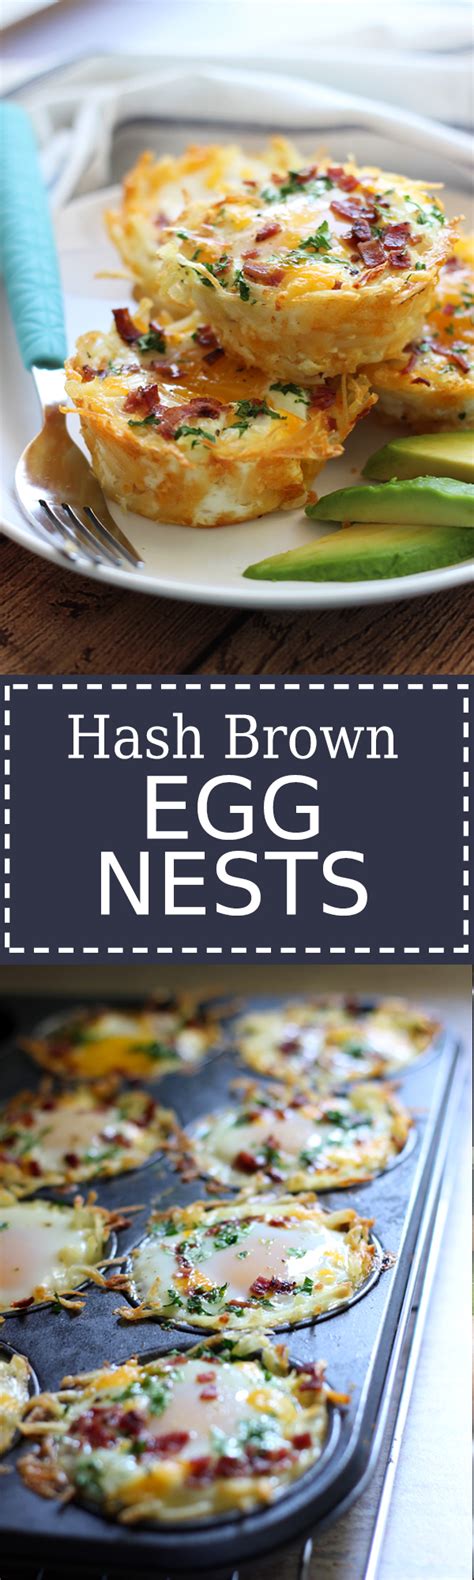 Sprinkle evenly with remaining 1⁄4 teaspoon salt and 1⁄8 teaspoon pepper. Hash Brown Egg Nests with Avocado - The Cooking Jar ...